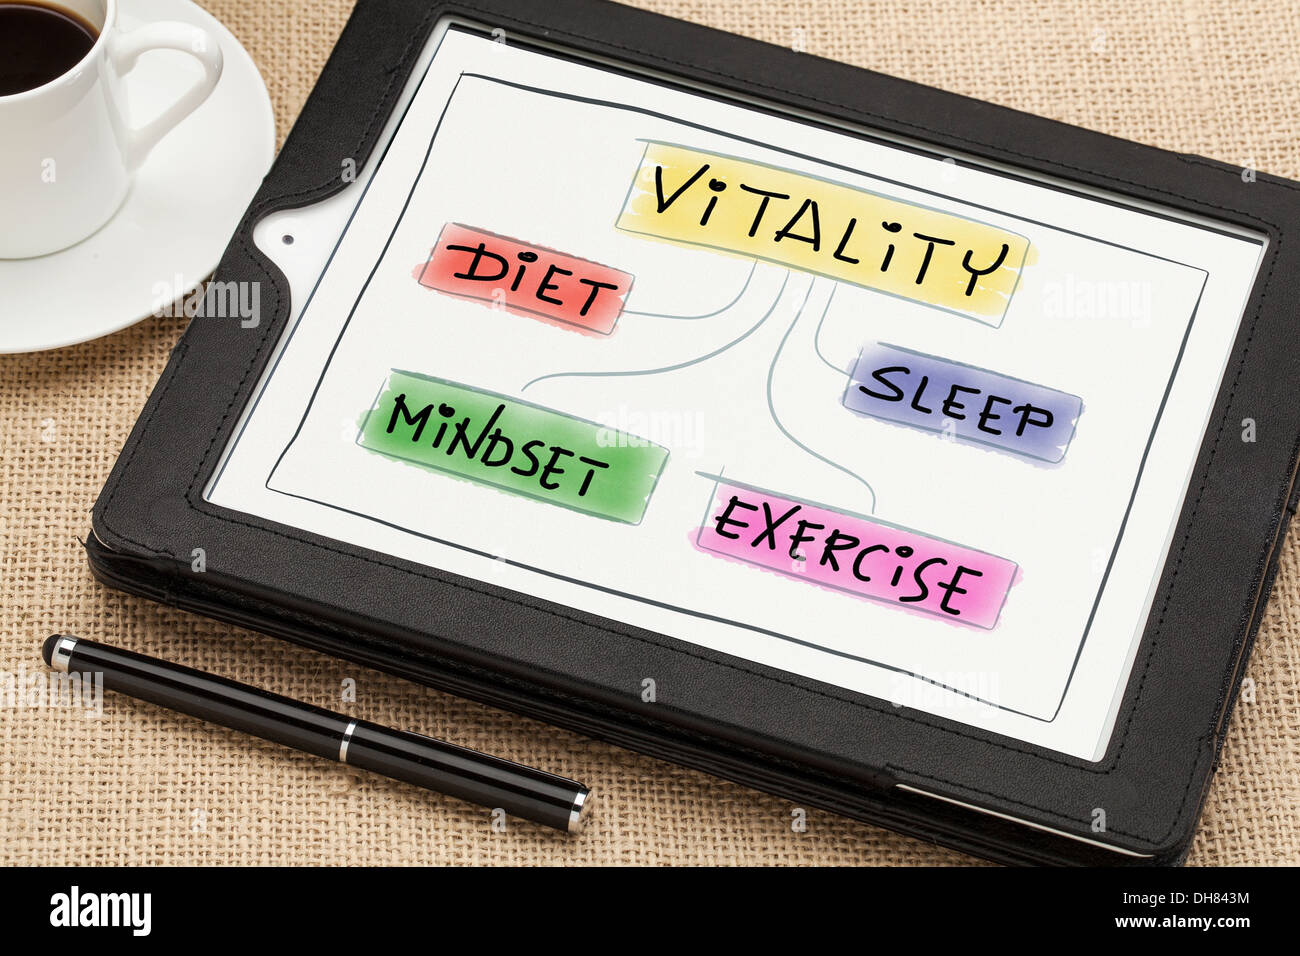 diet, sleep, exercise and mindset - vitality or wellness concept on a digital tablet Stock Photo